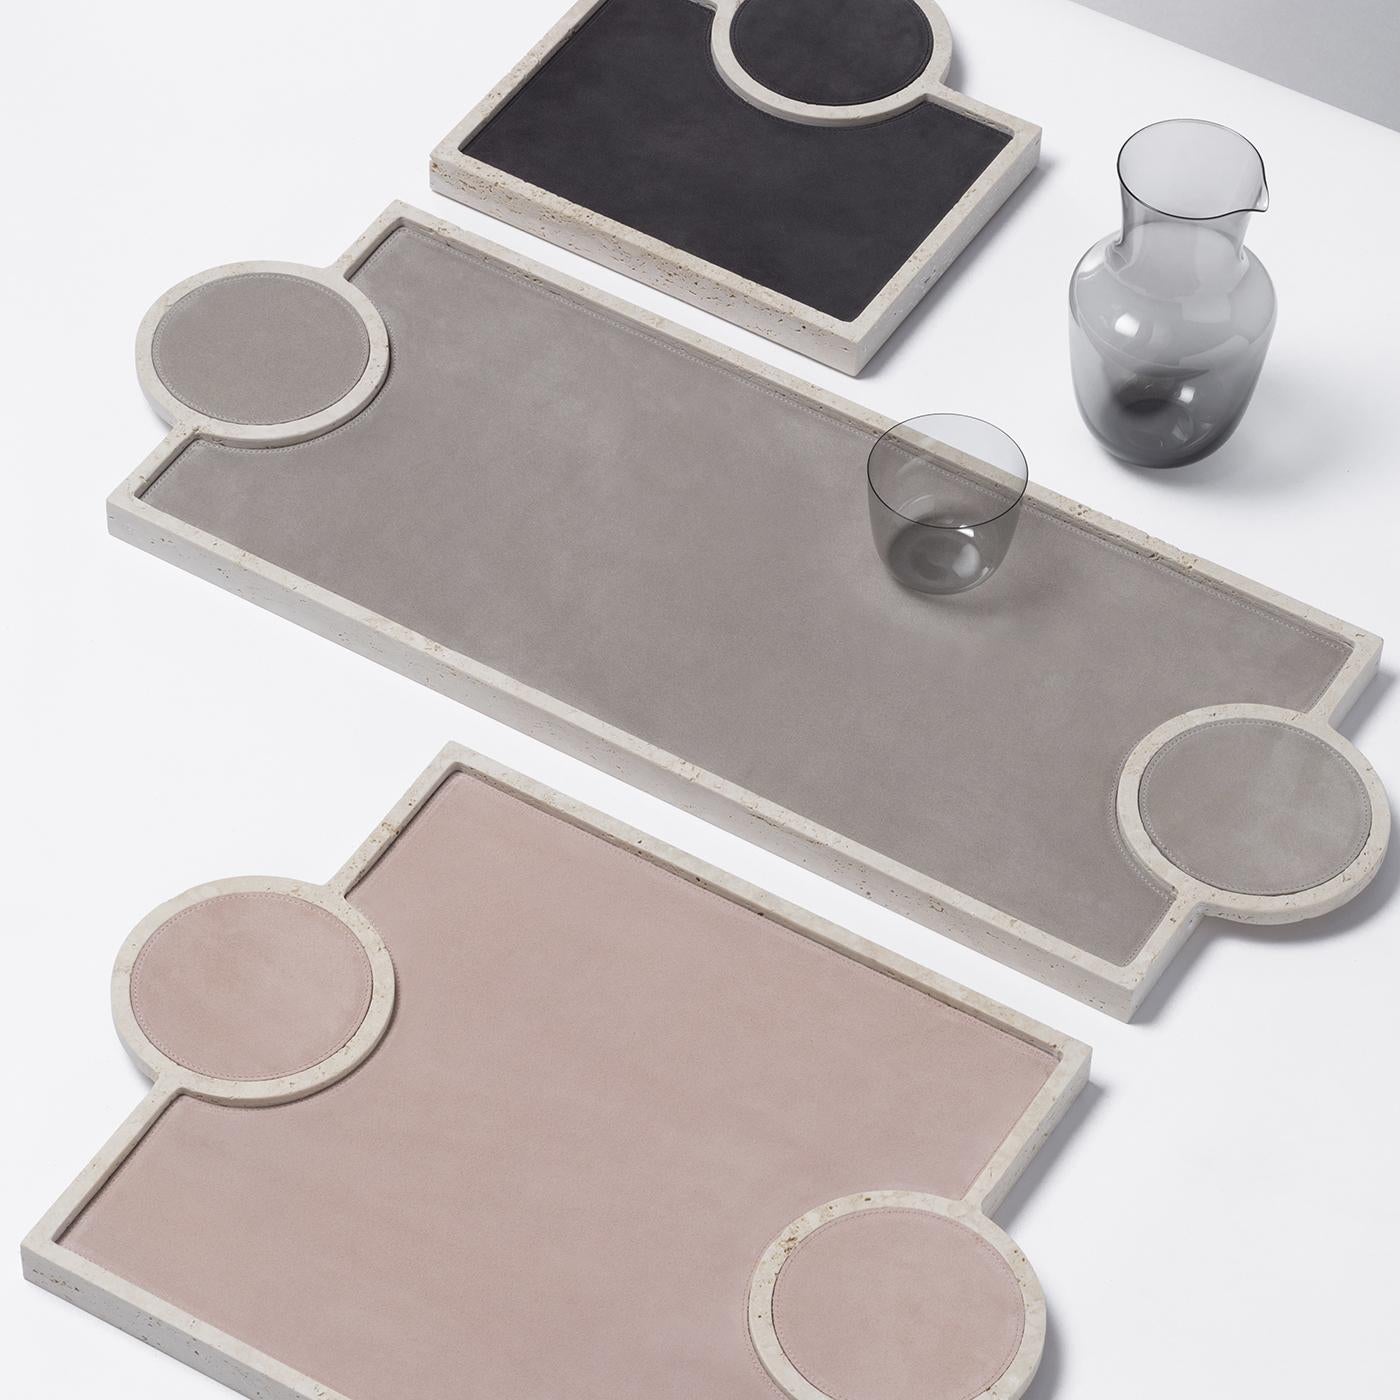 This refined tray is a sleek and modern addition to any home decor. Crafted of prized, travertine limestone, the long, rectangular frame is lined with taupe nappa leather. The tray handles are formed by two flat, two-dimensional circles embedded on